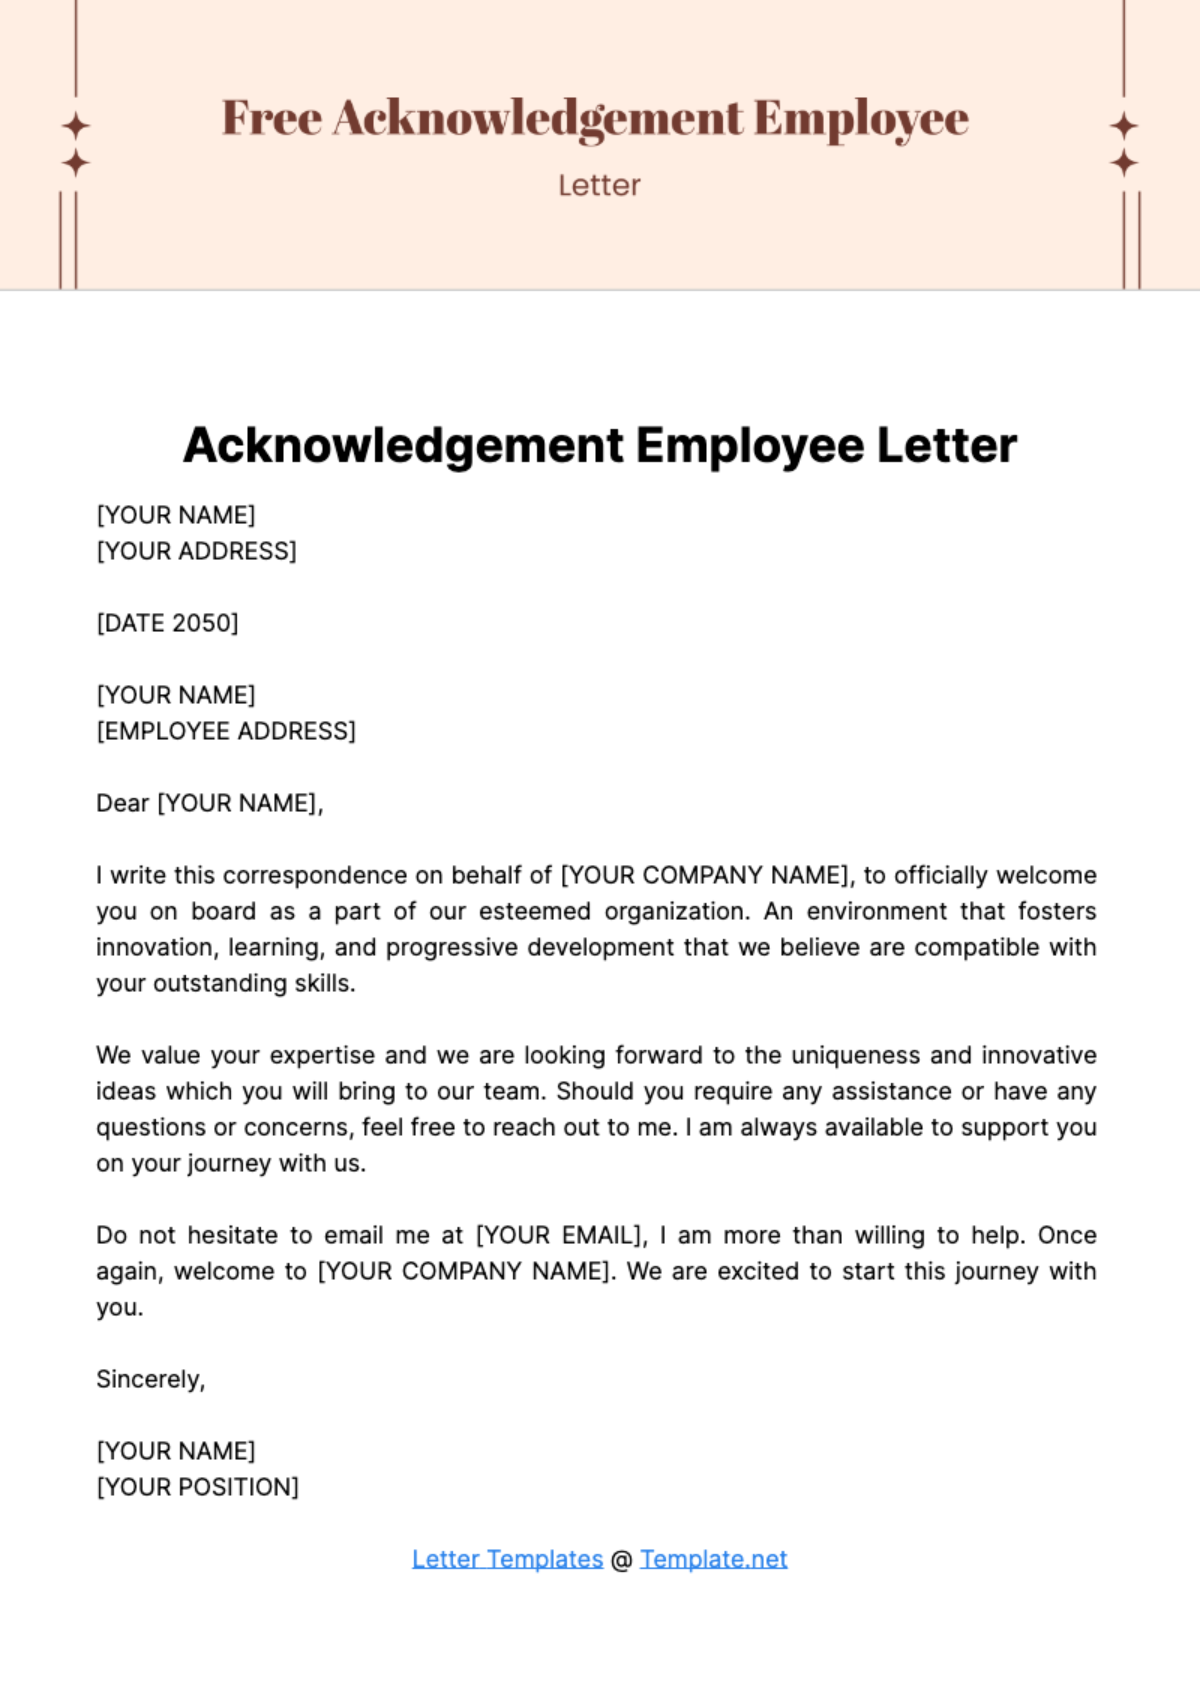 Acknowledgement Employee Letter Template